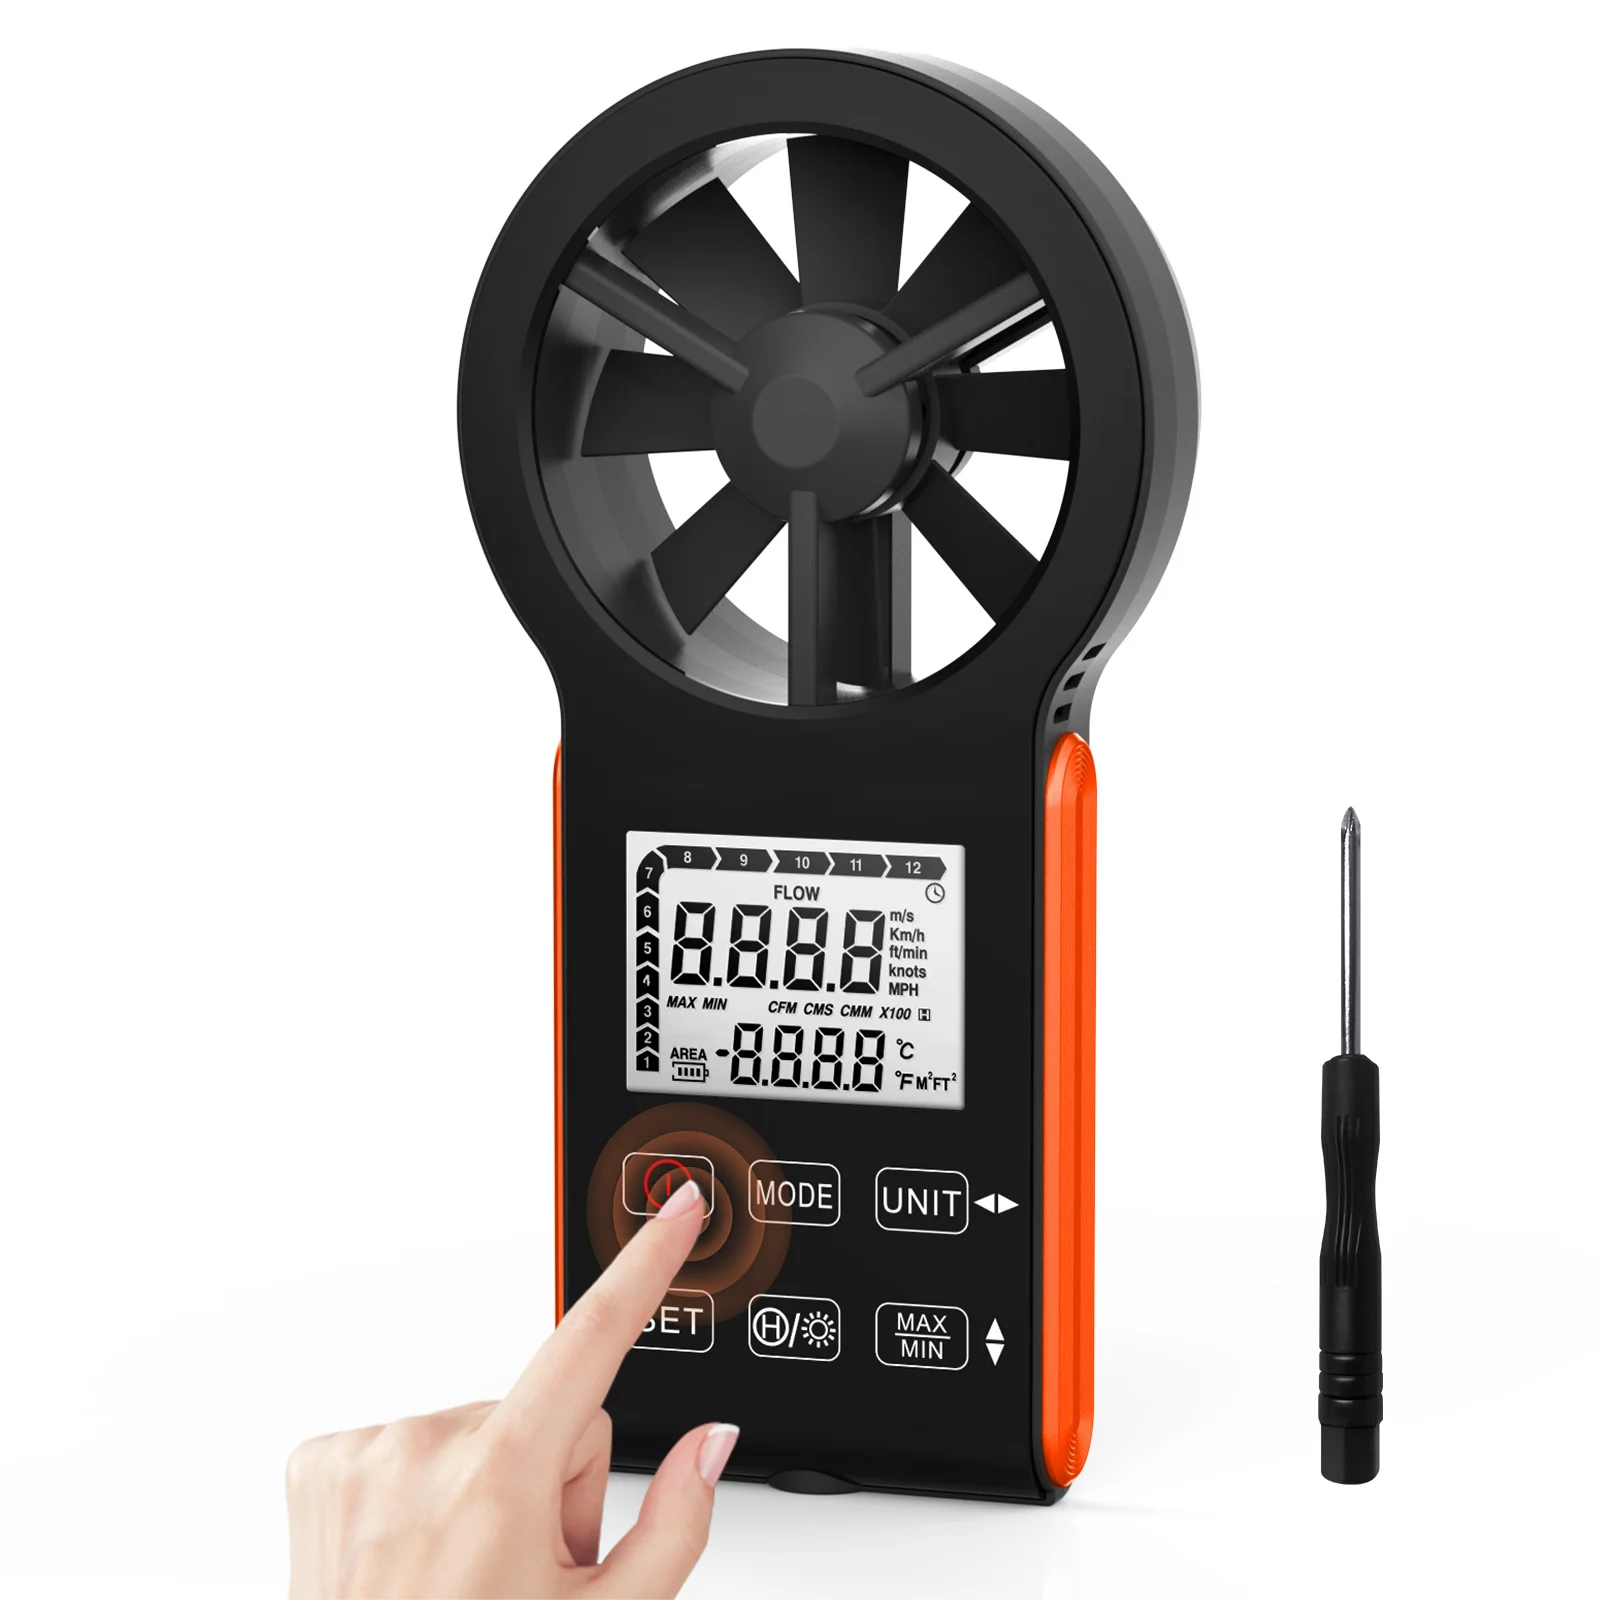 

2023 NEW LCD Digital Anemometer Thermometer Handheld Wind Speedometer Touch Screen Tools Windmesser Air Flow RPM Meter